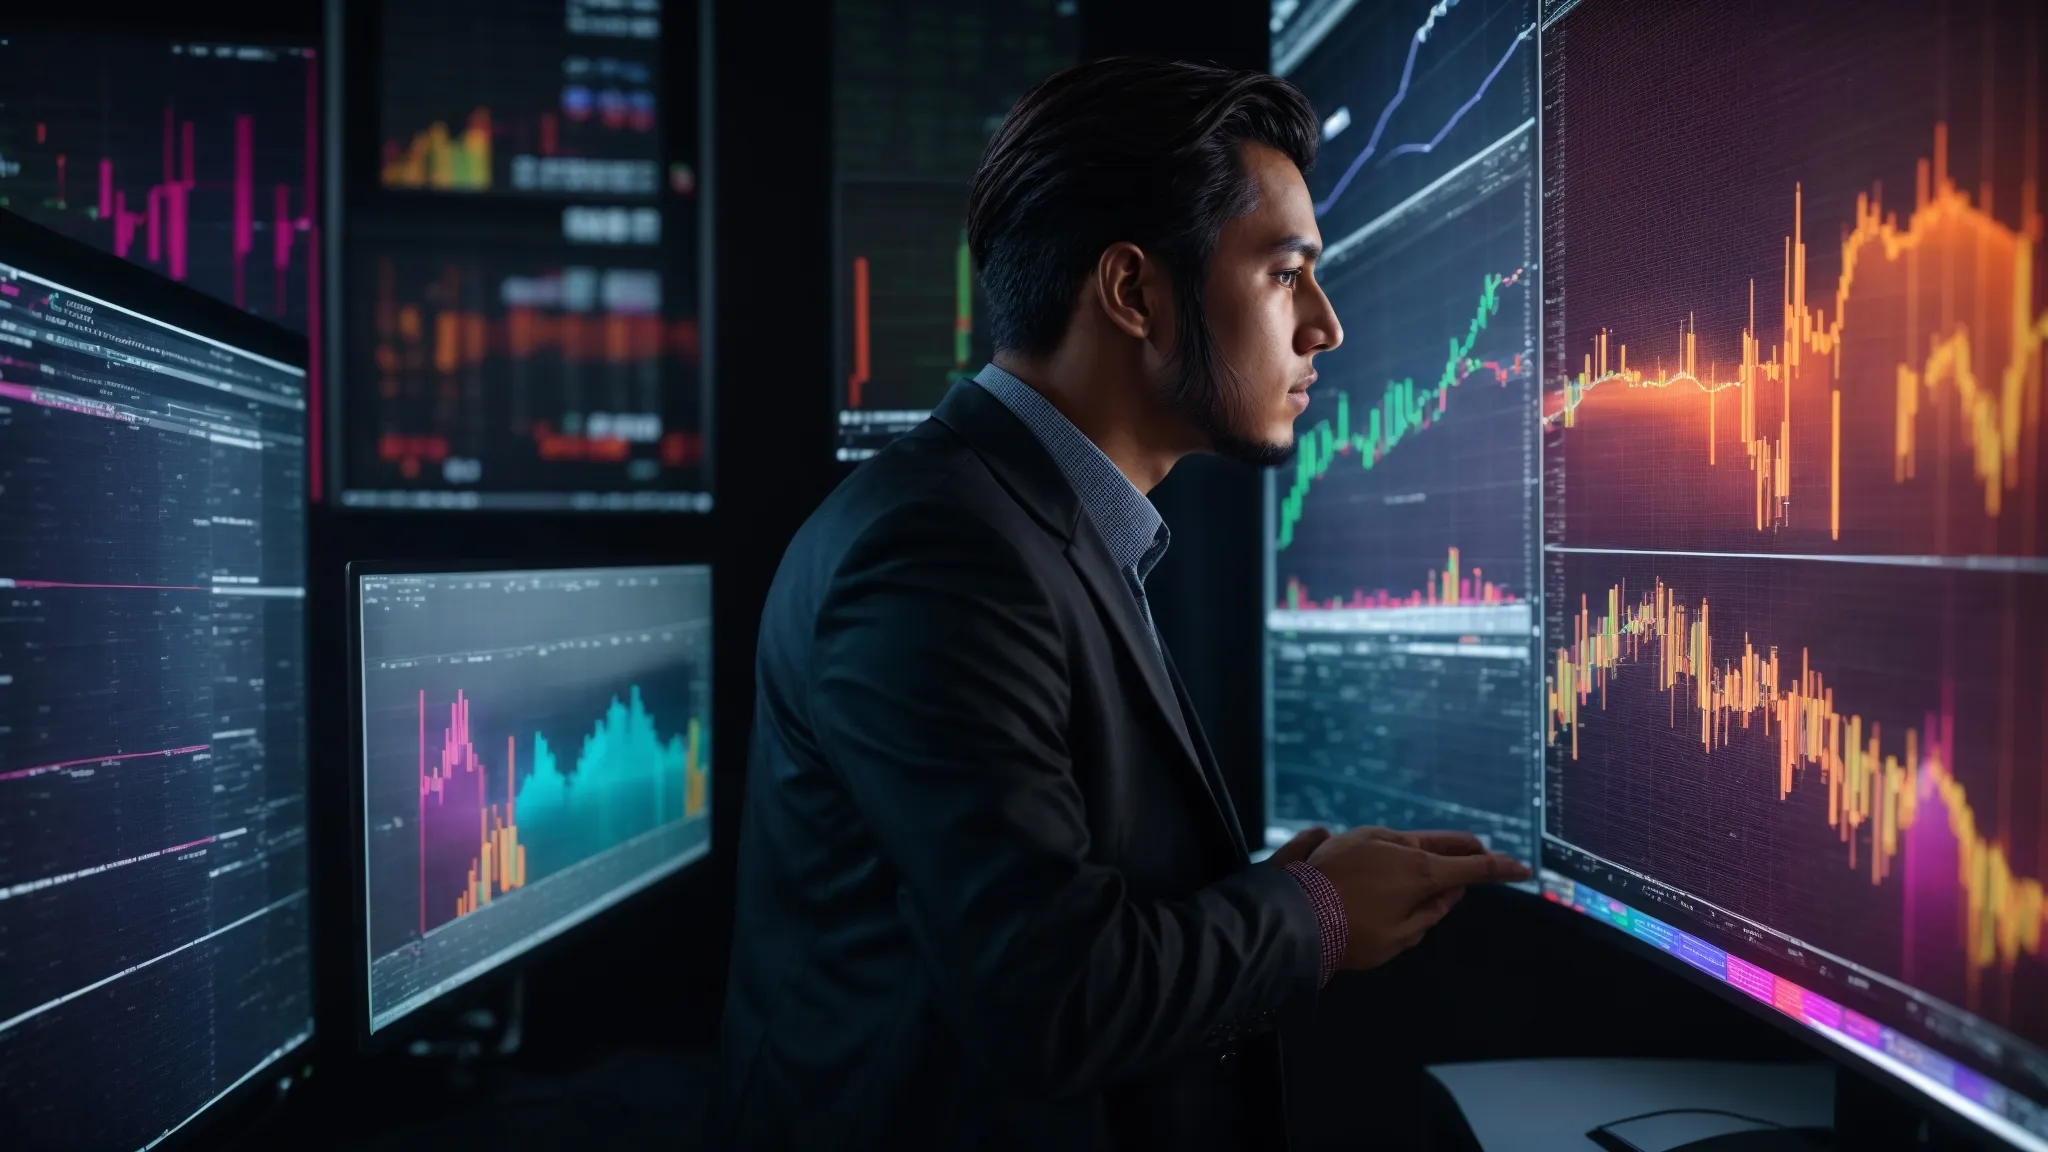 a focused individual gazes at a sleek, modern computer screen displaying colorful graphs and data analytics charts.